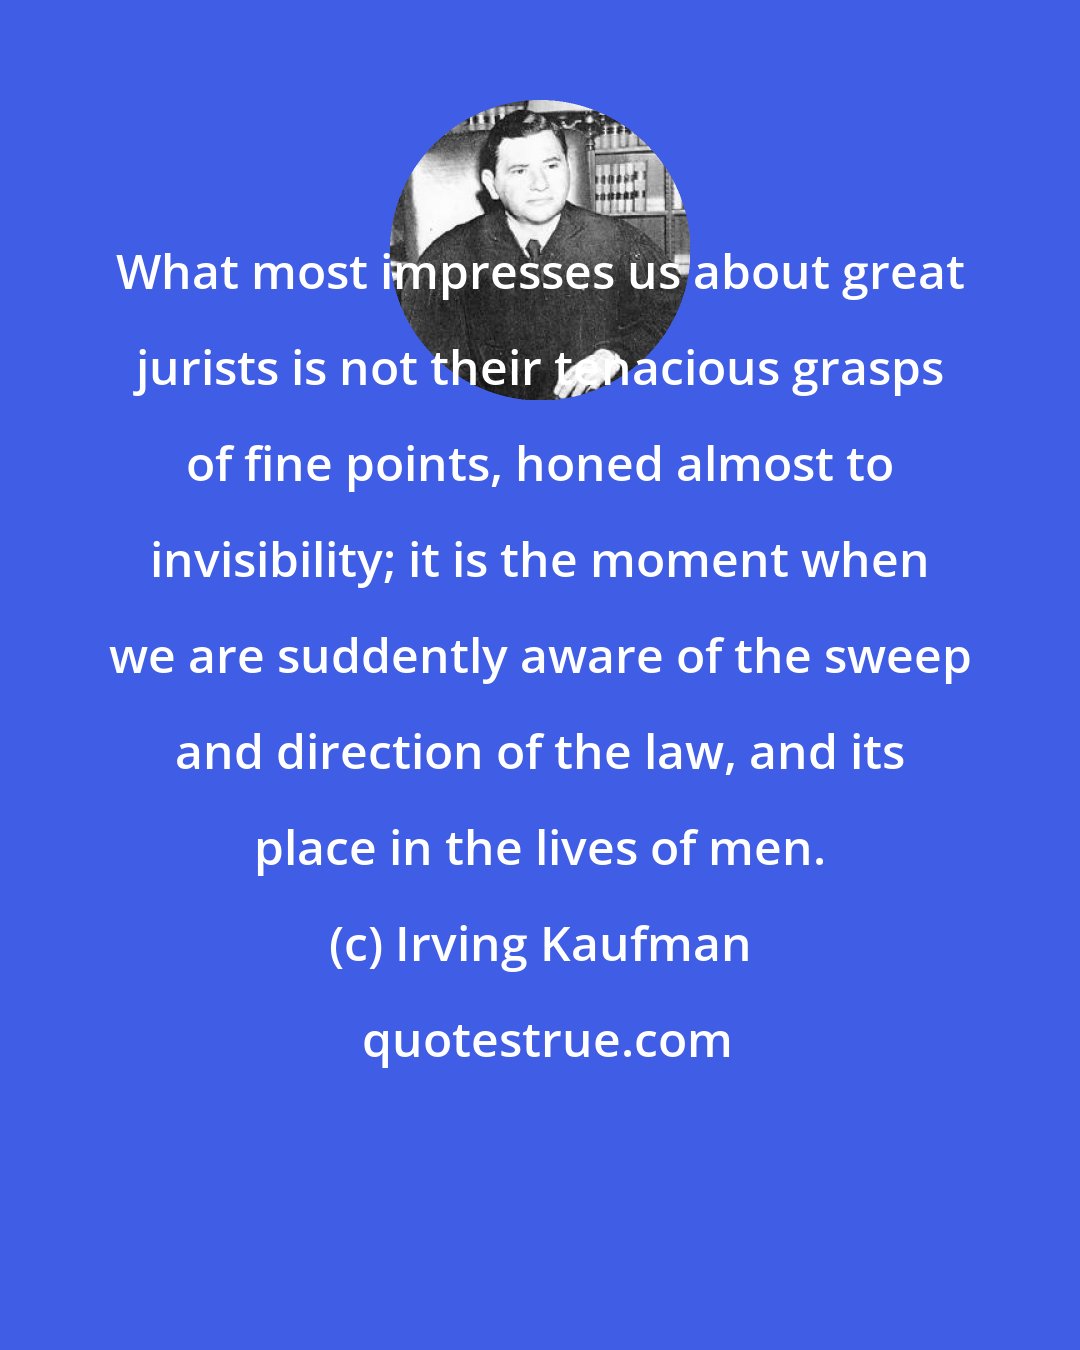 Irving Kaufman: What most impresses us about great jurists is not their tenacious grasps of fine points, honed almost to invisibility; it is the moment when we are suddently aware of the sweep and direction of the law, and its place in the lives of men.